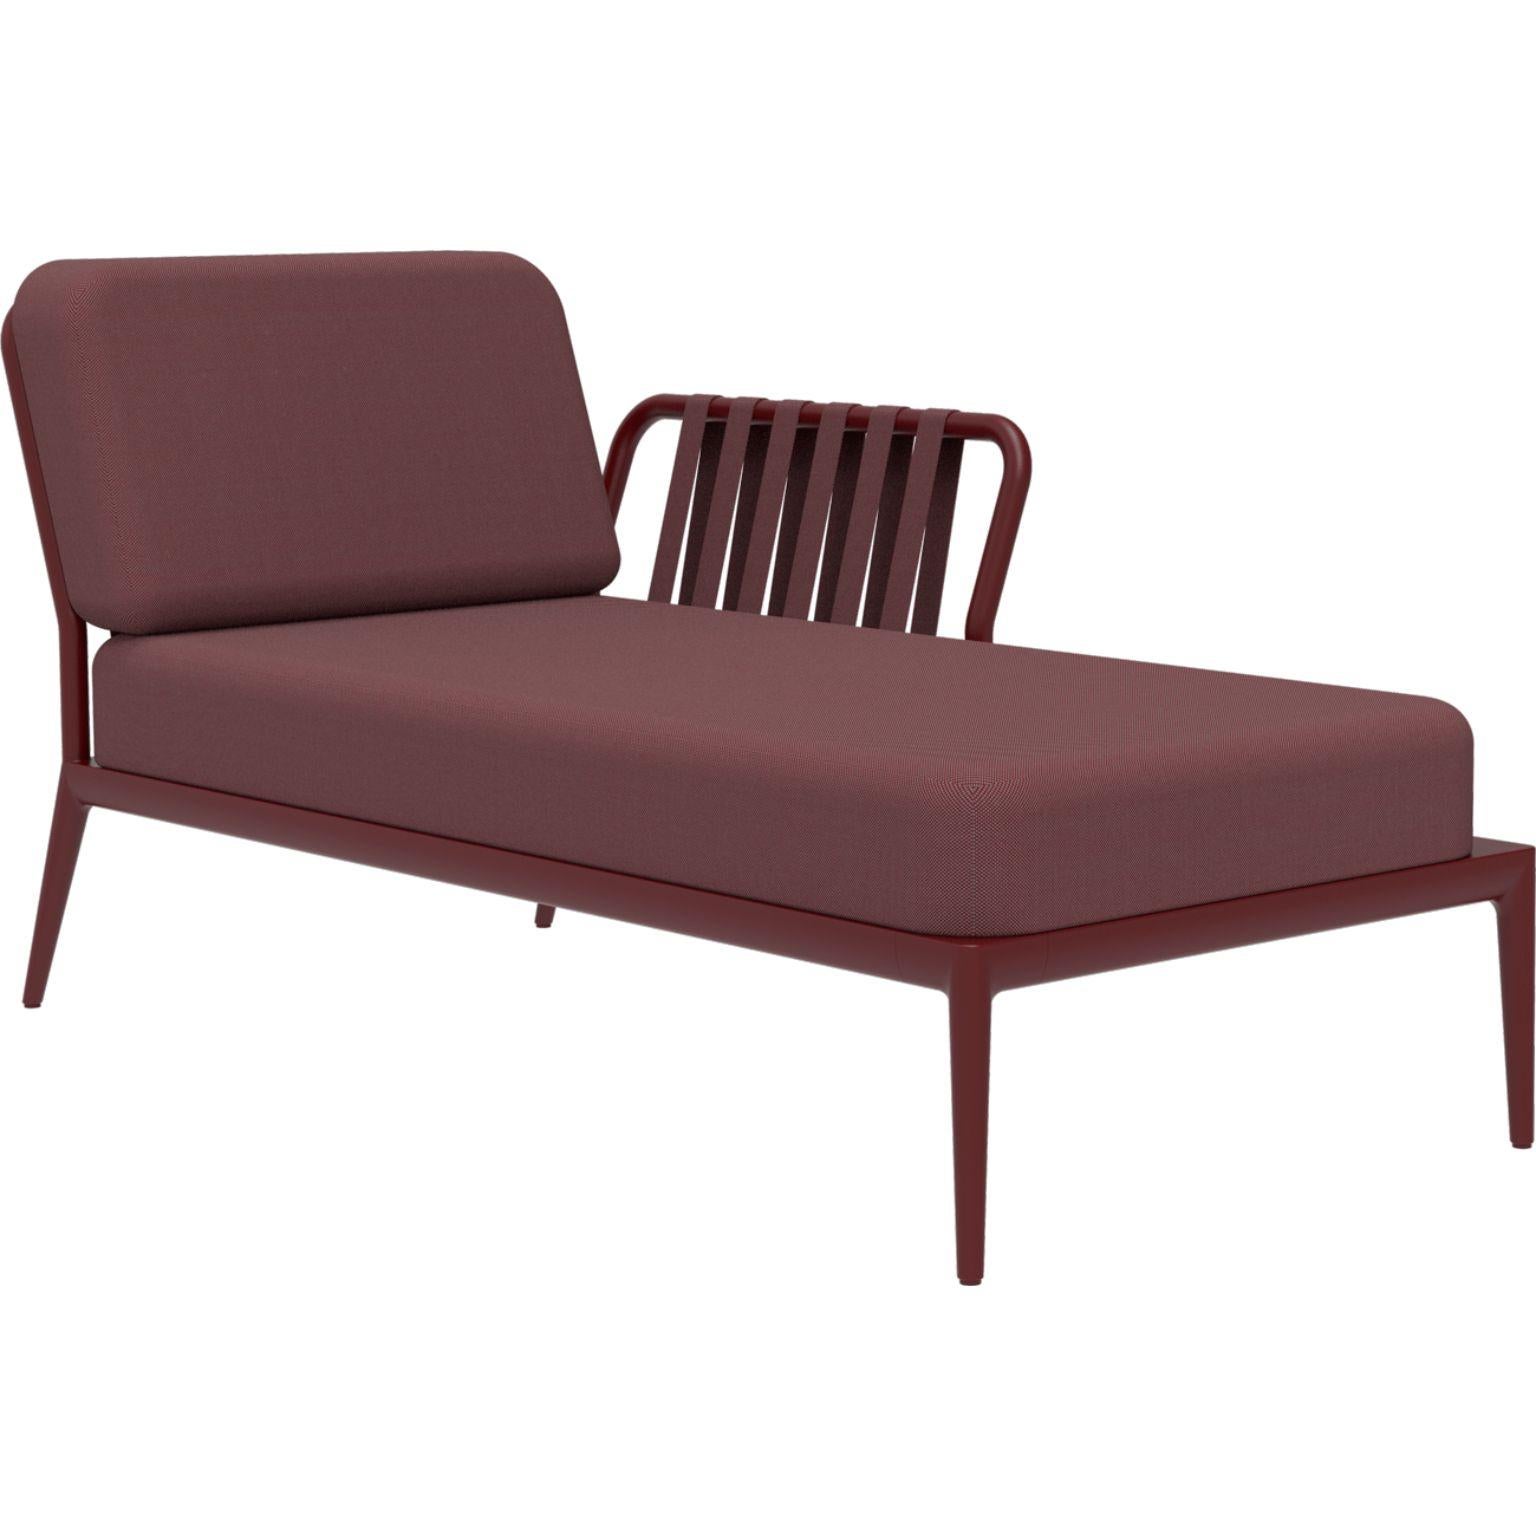 Ribbons Burgundy Left Chaise Longue by MOWEE
Dimensions: D80 x W155 x H81 cm
Material: Aluminum, Upholstery
Weight: 28 kg
Also Available in different colors and finishes. 

An unmistakable collection for its beauty and robustness. A tribute to